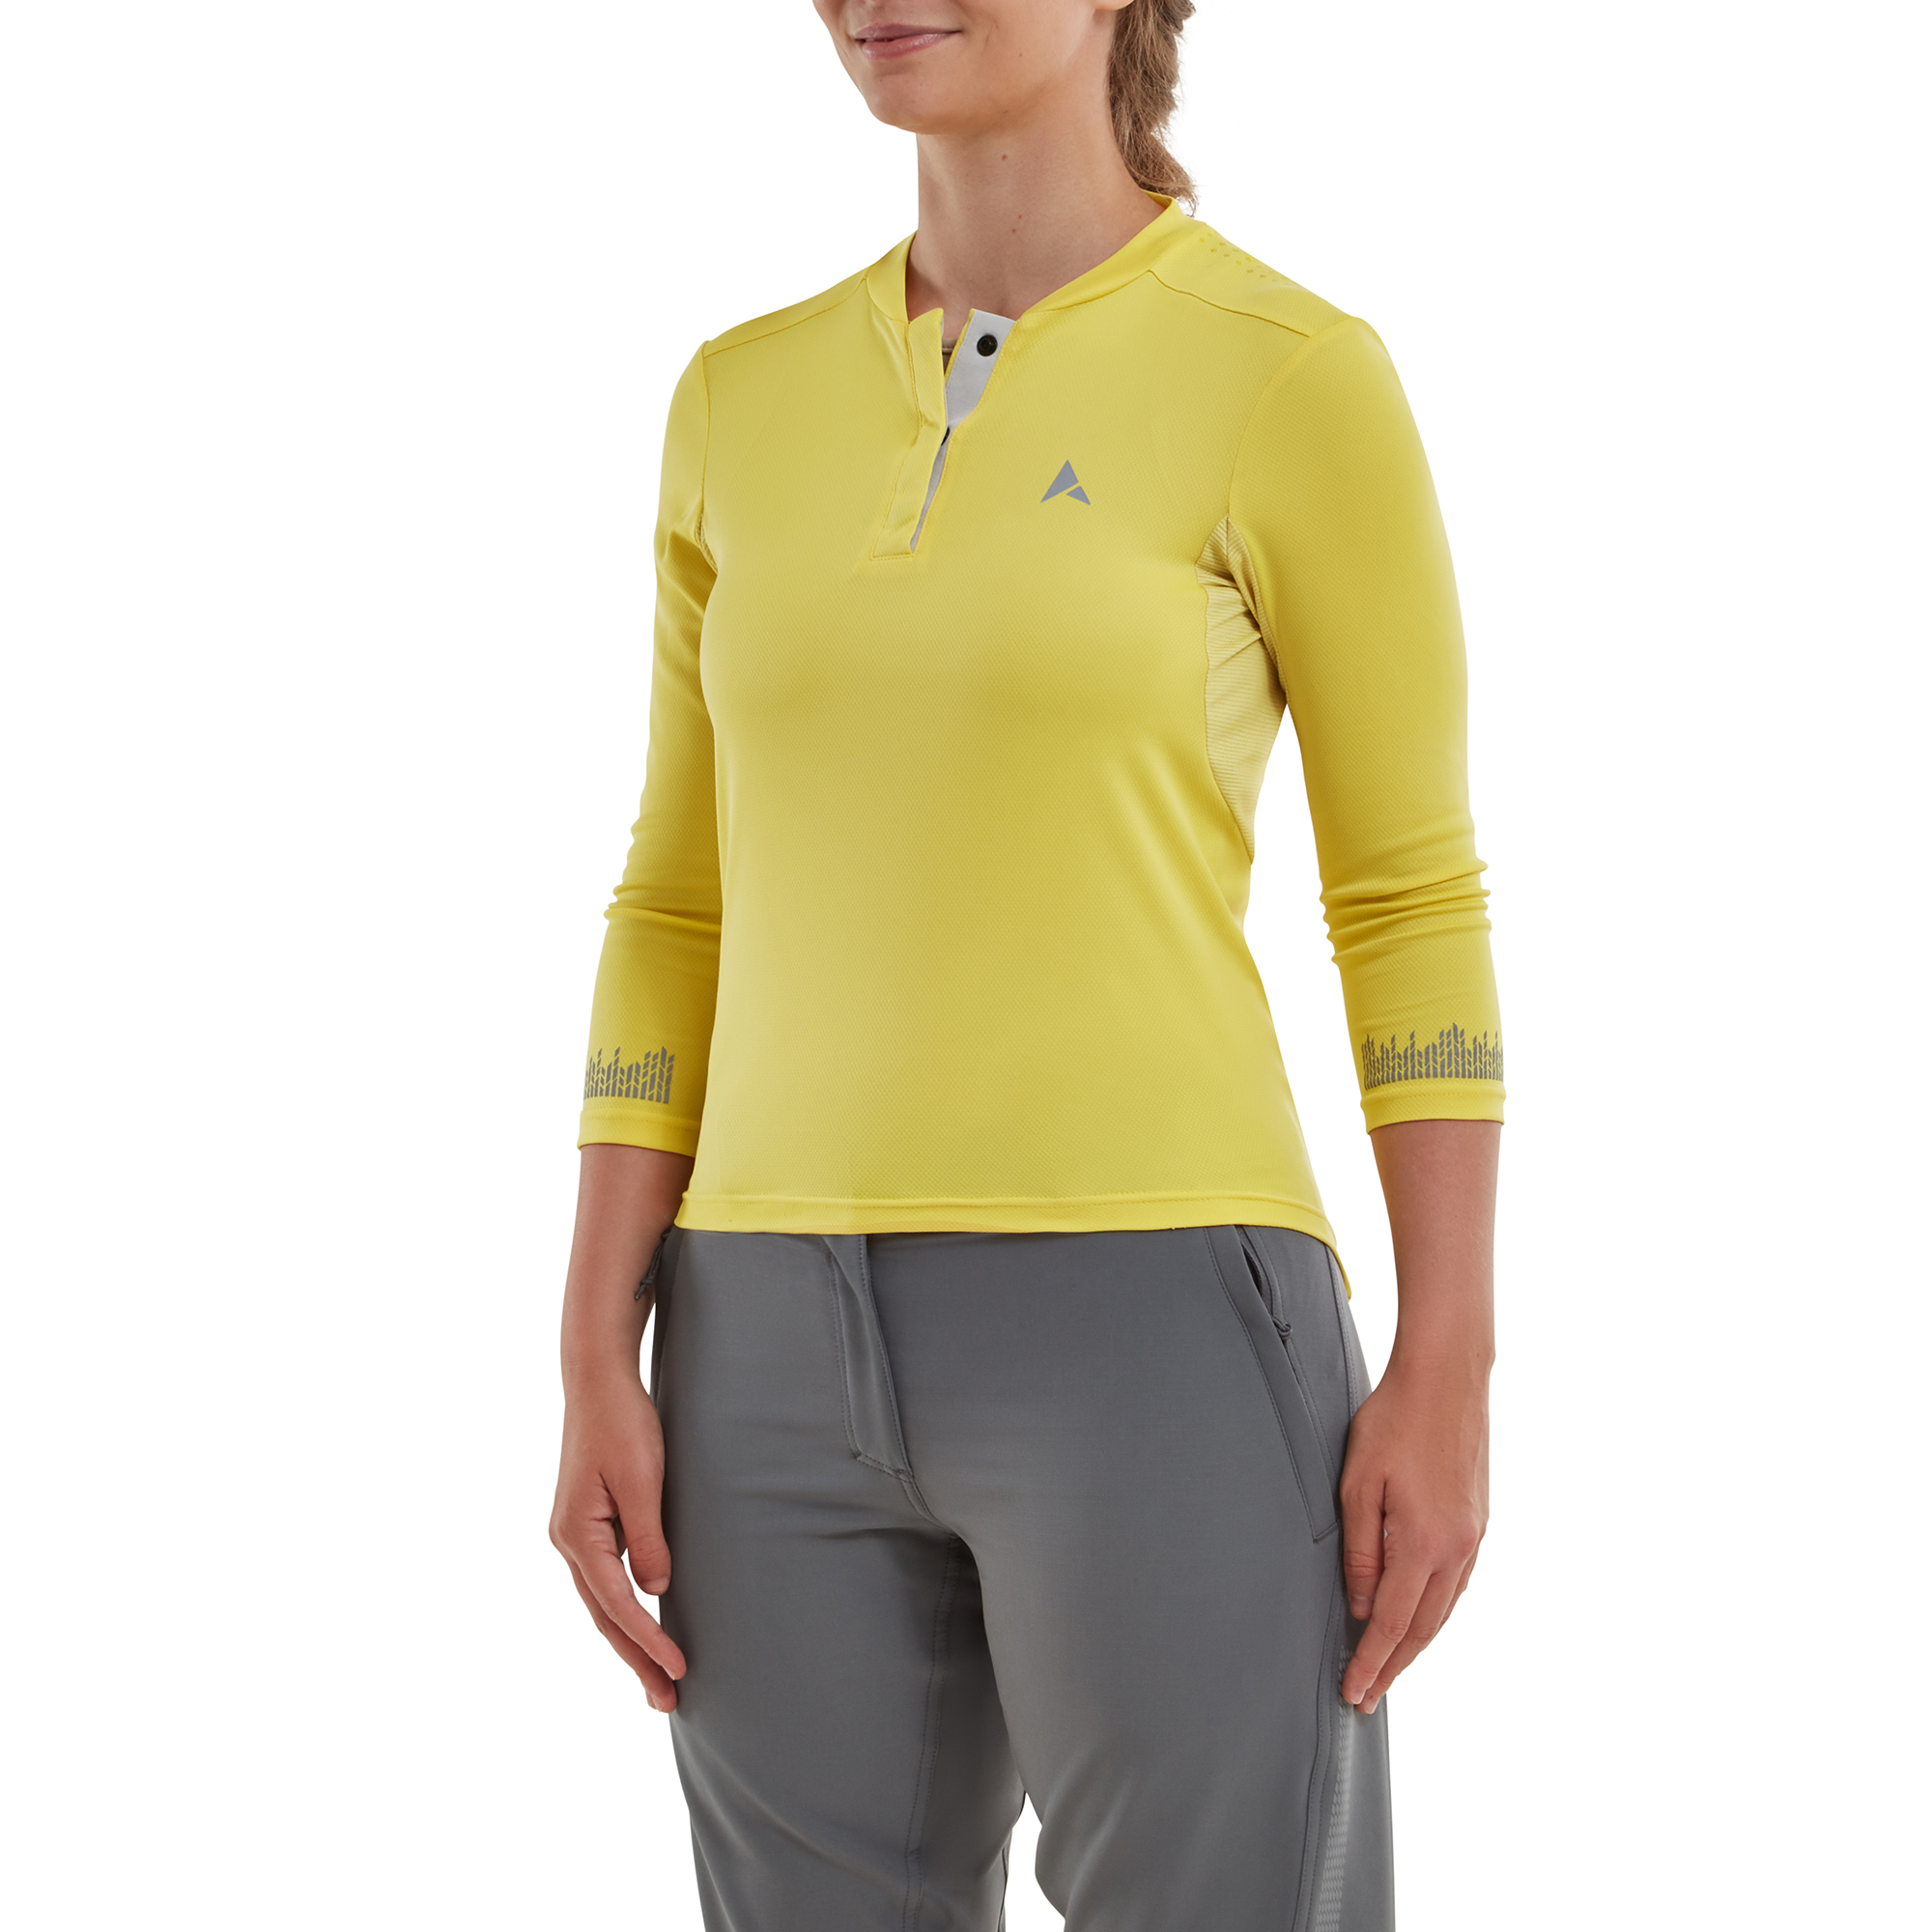 Altura  Women’s 3/4 Sleeve All Road Jersey 8 YELLOW